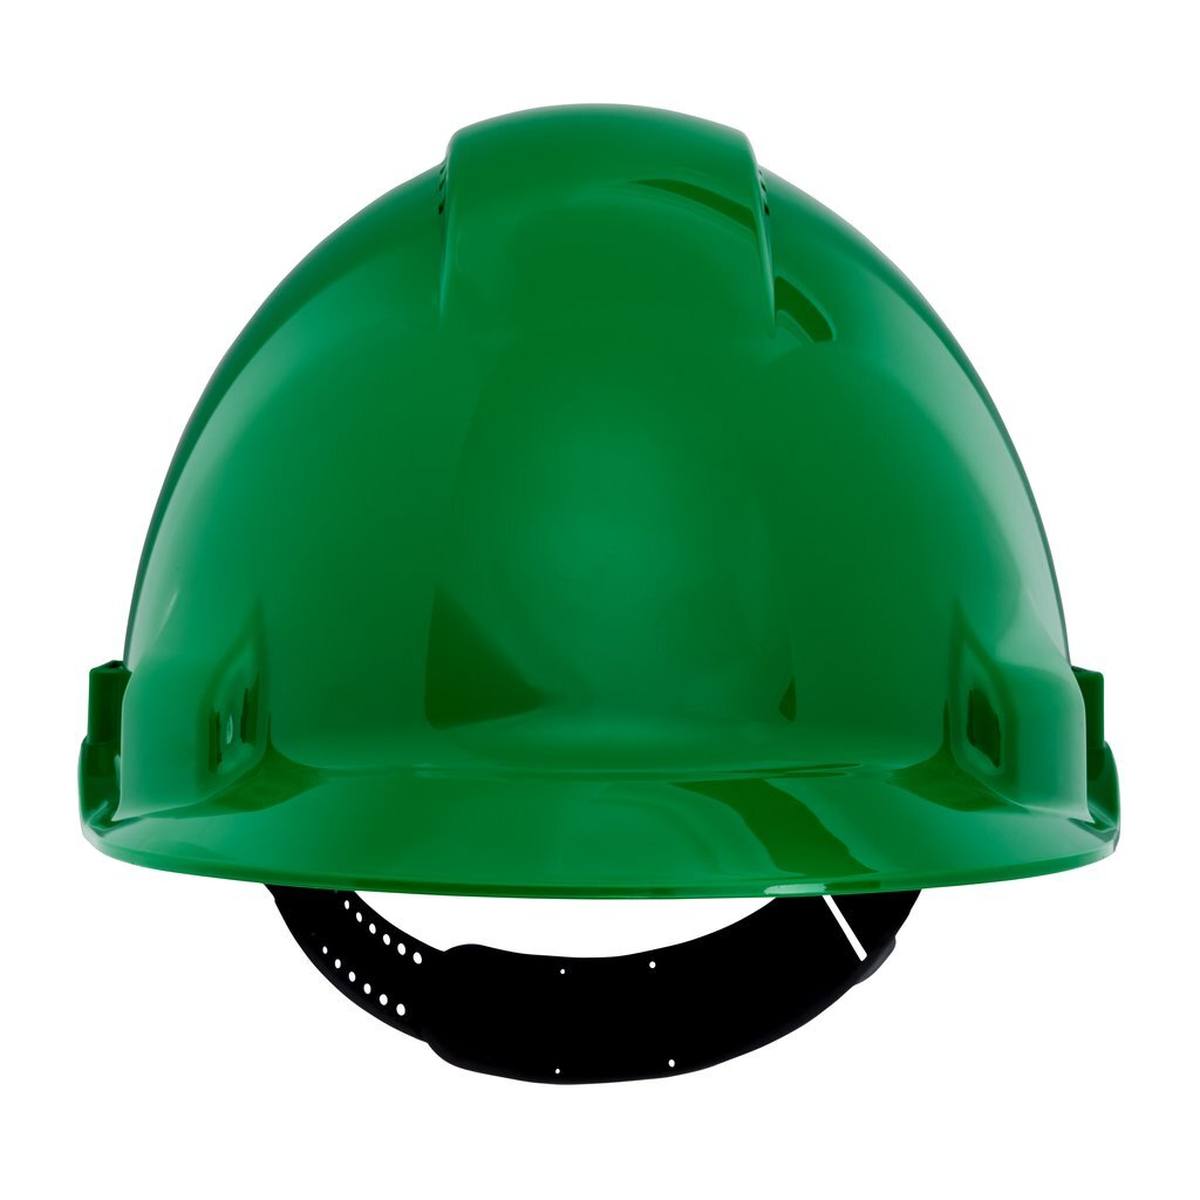 3M G3000 safety helmet G30CUG in green, ventilated, with uvicator, pinlock and plastic sweatband